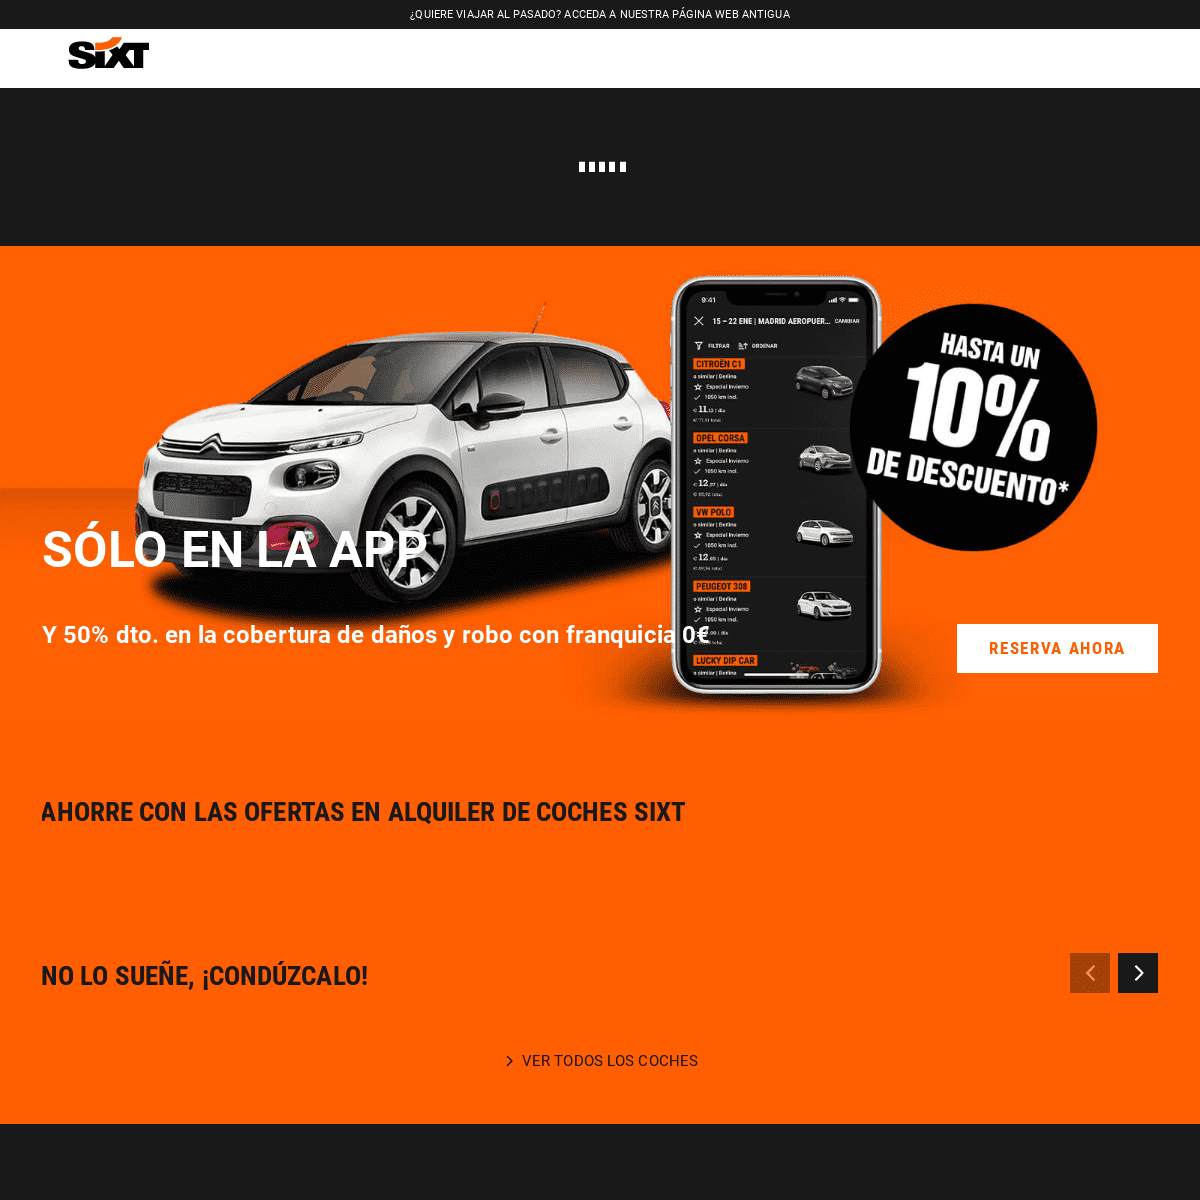 A complete backup of https://sixt.es